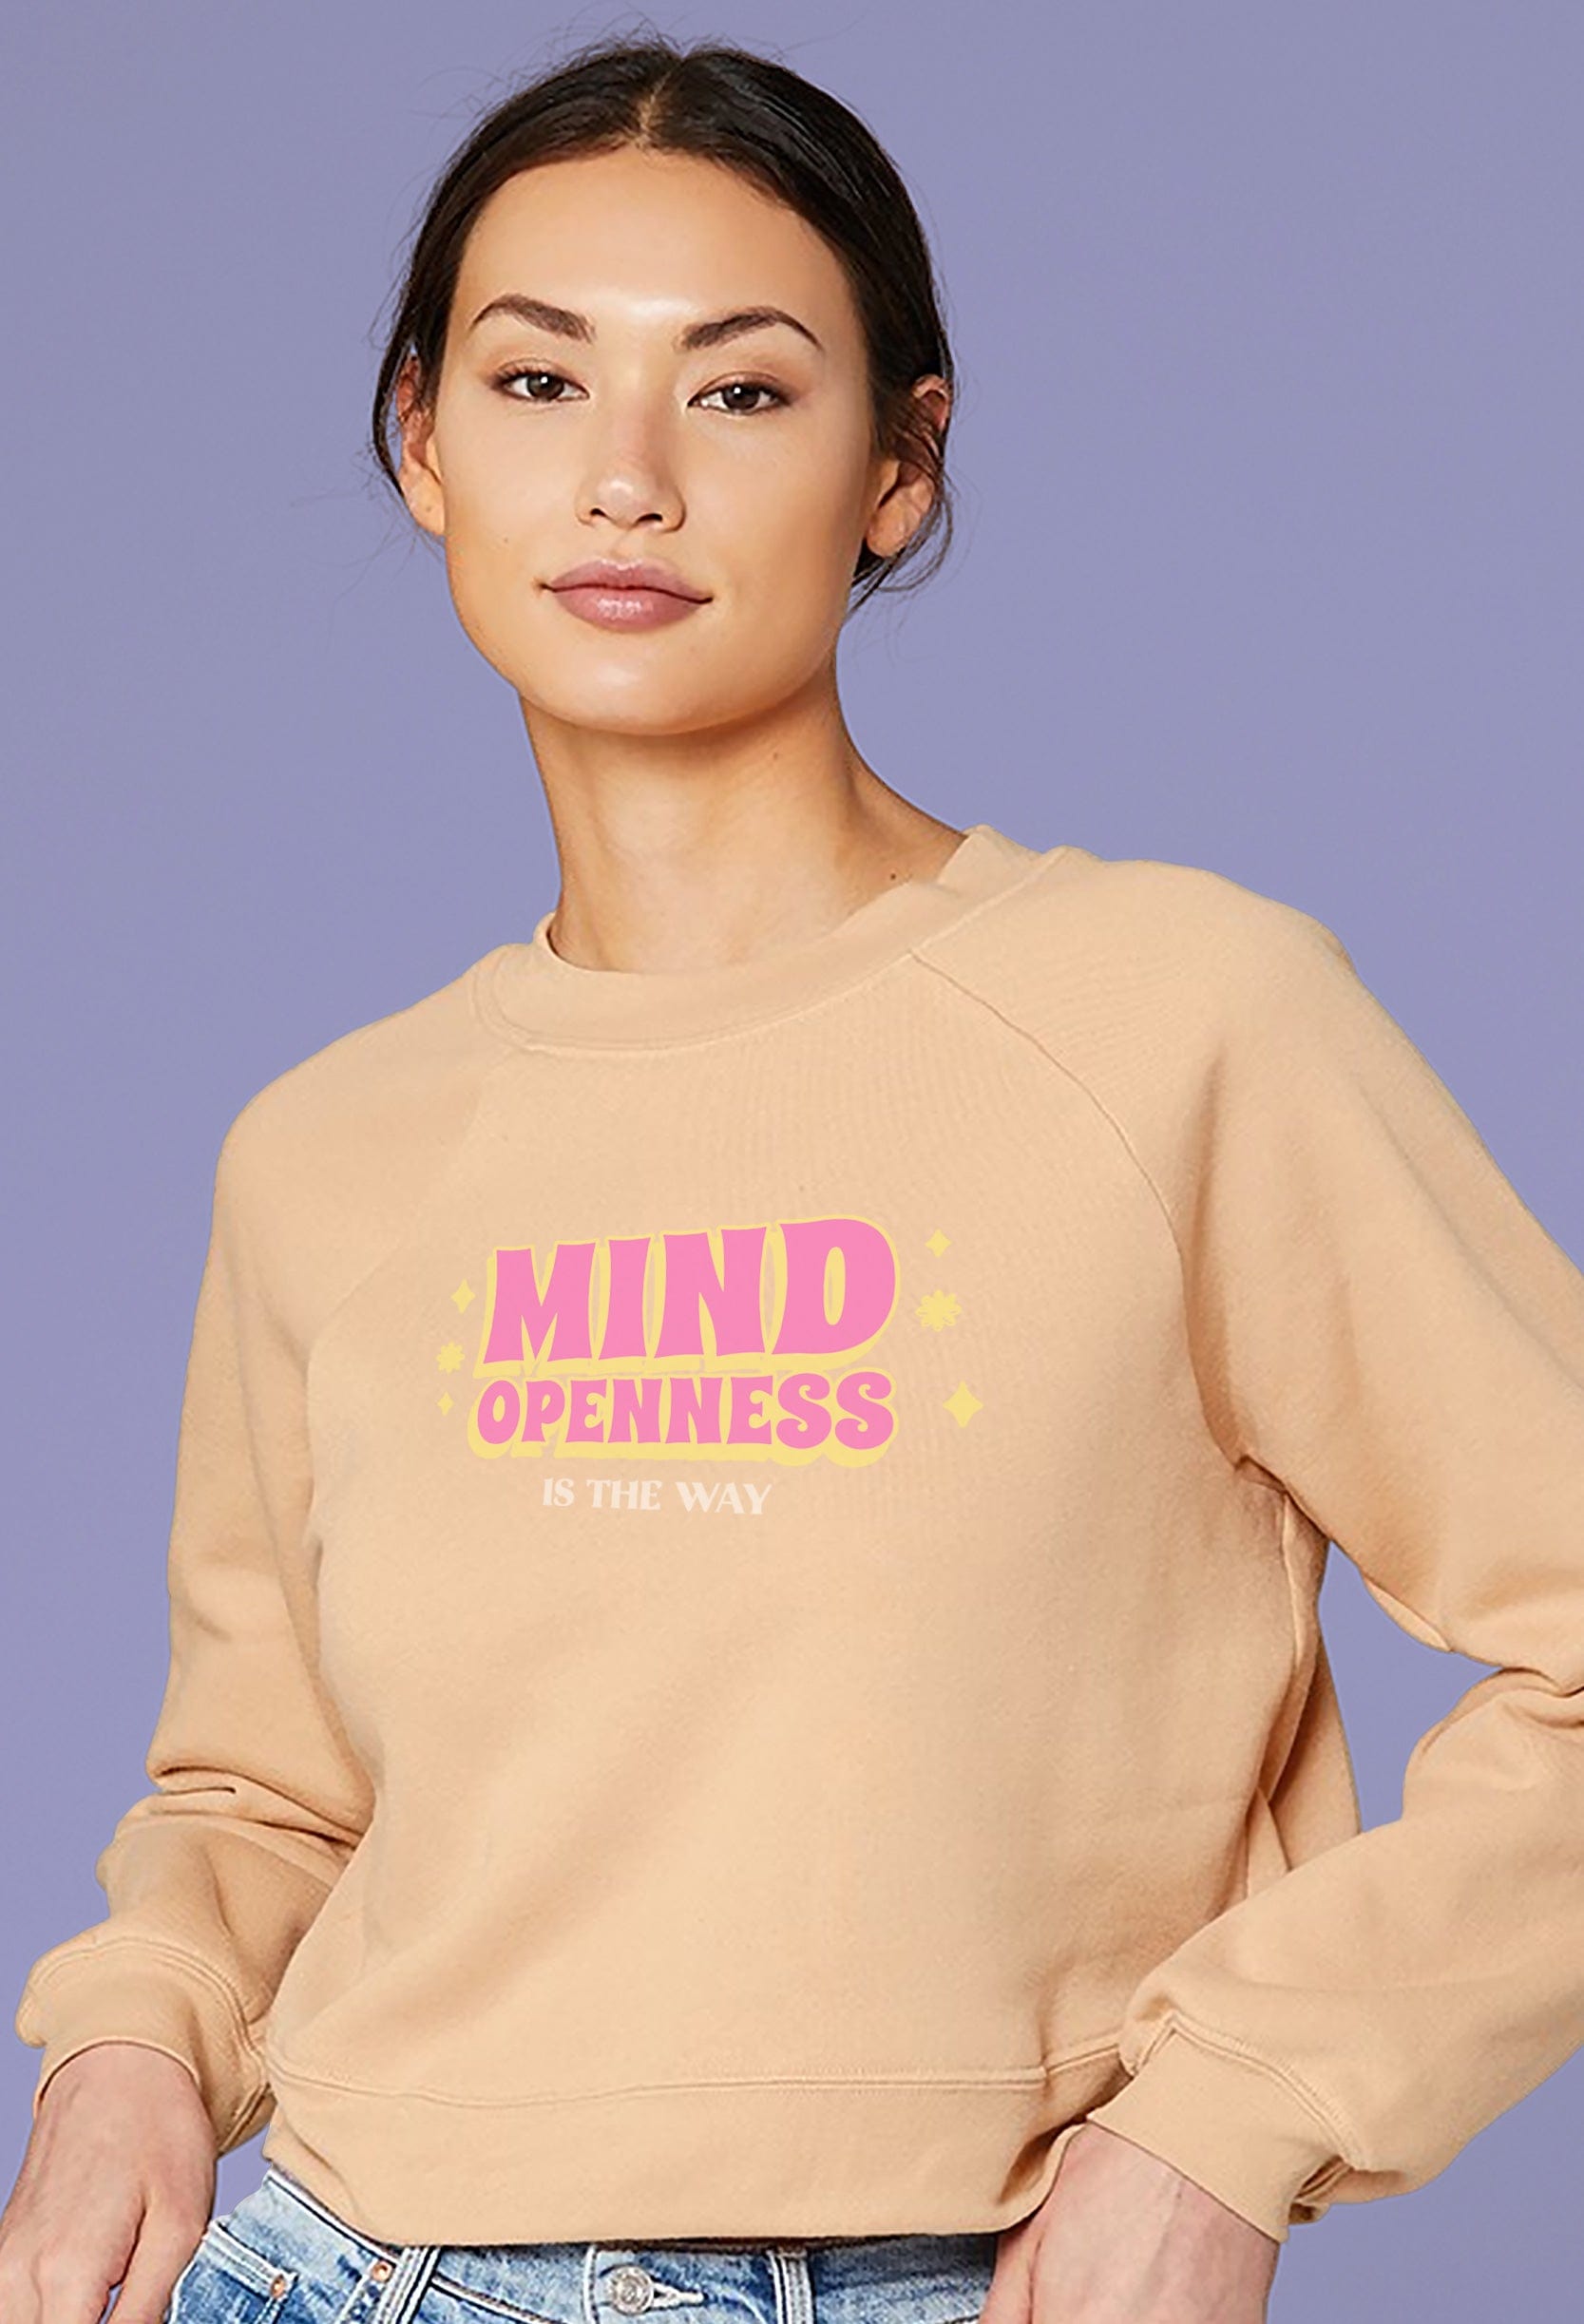 This is The Remix Cropped Sweatshirt MIND OPENNESS IS THE WAY - Retro Cropped Sweatshirt in Peach